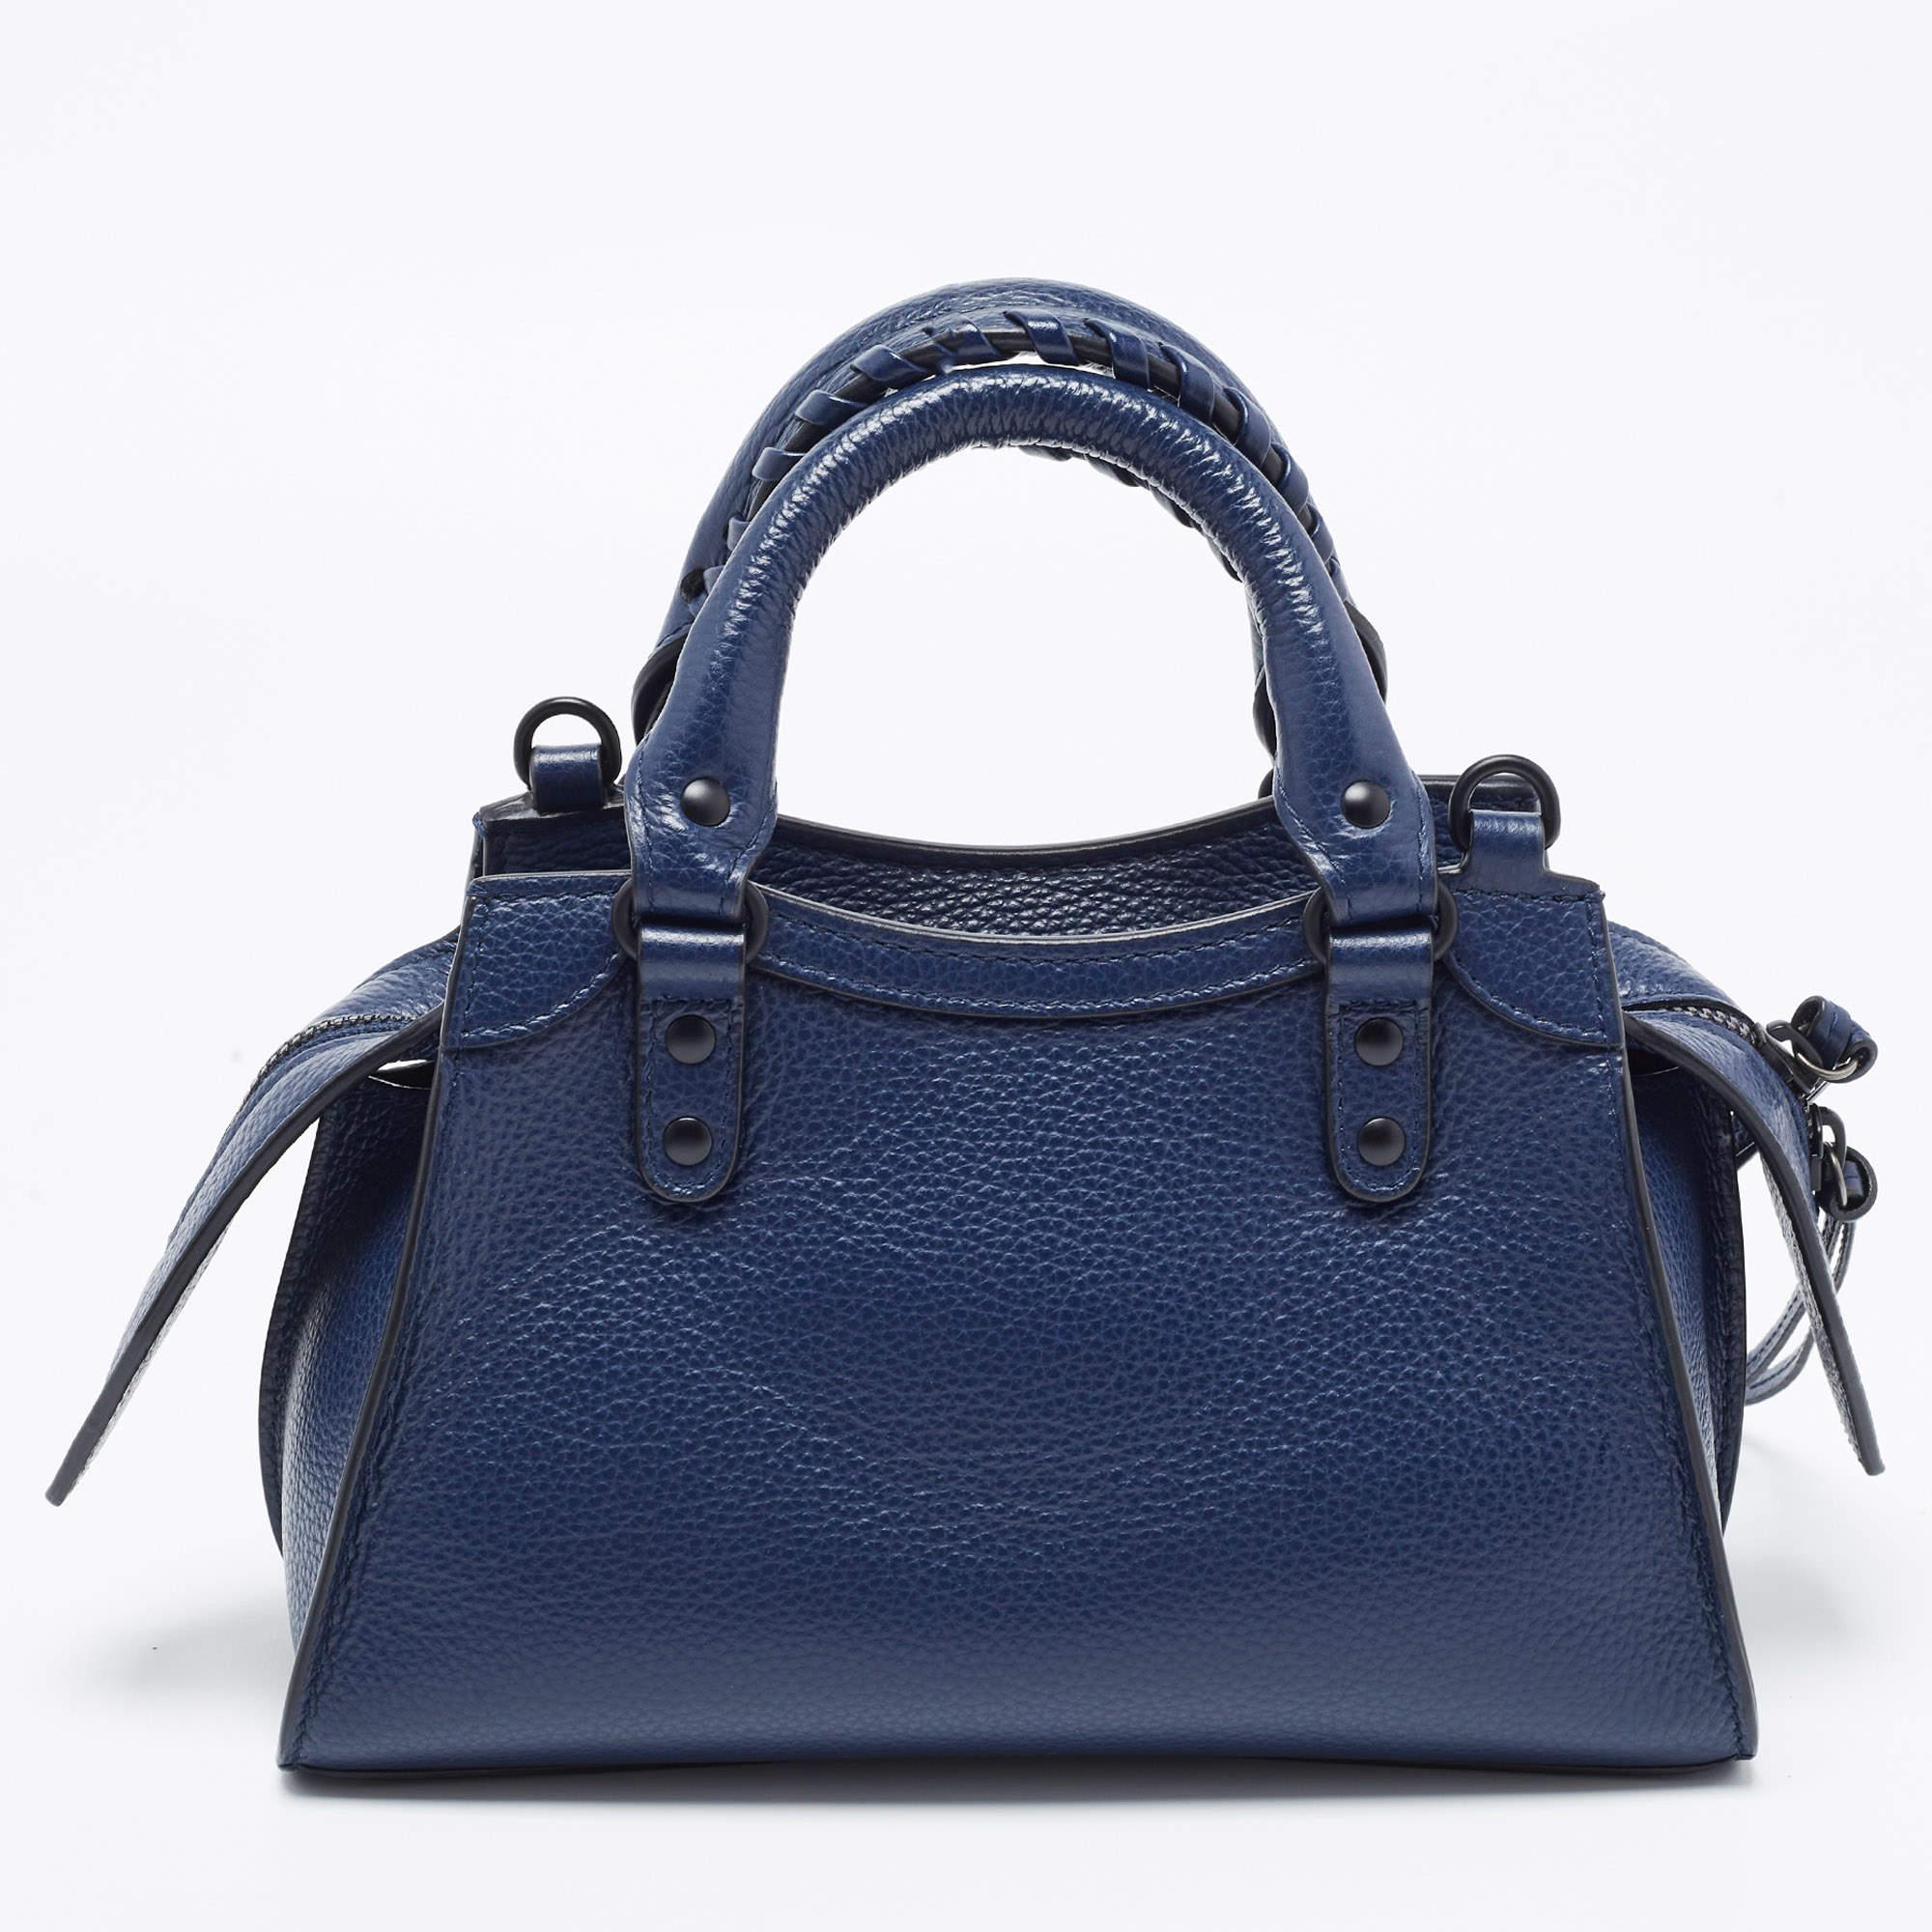 The Balenciaga City tote is a compact yet stylish handbag crafted from premium dark blue leather. It features the iconic Neo Classic design with black-tone hardware, a top zip closure, and a detachable shoulder strap, making it a versatile and